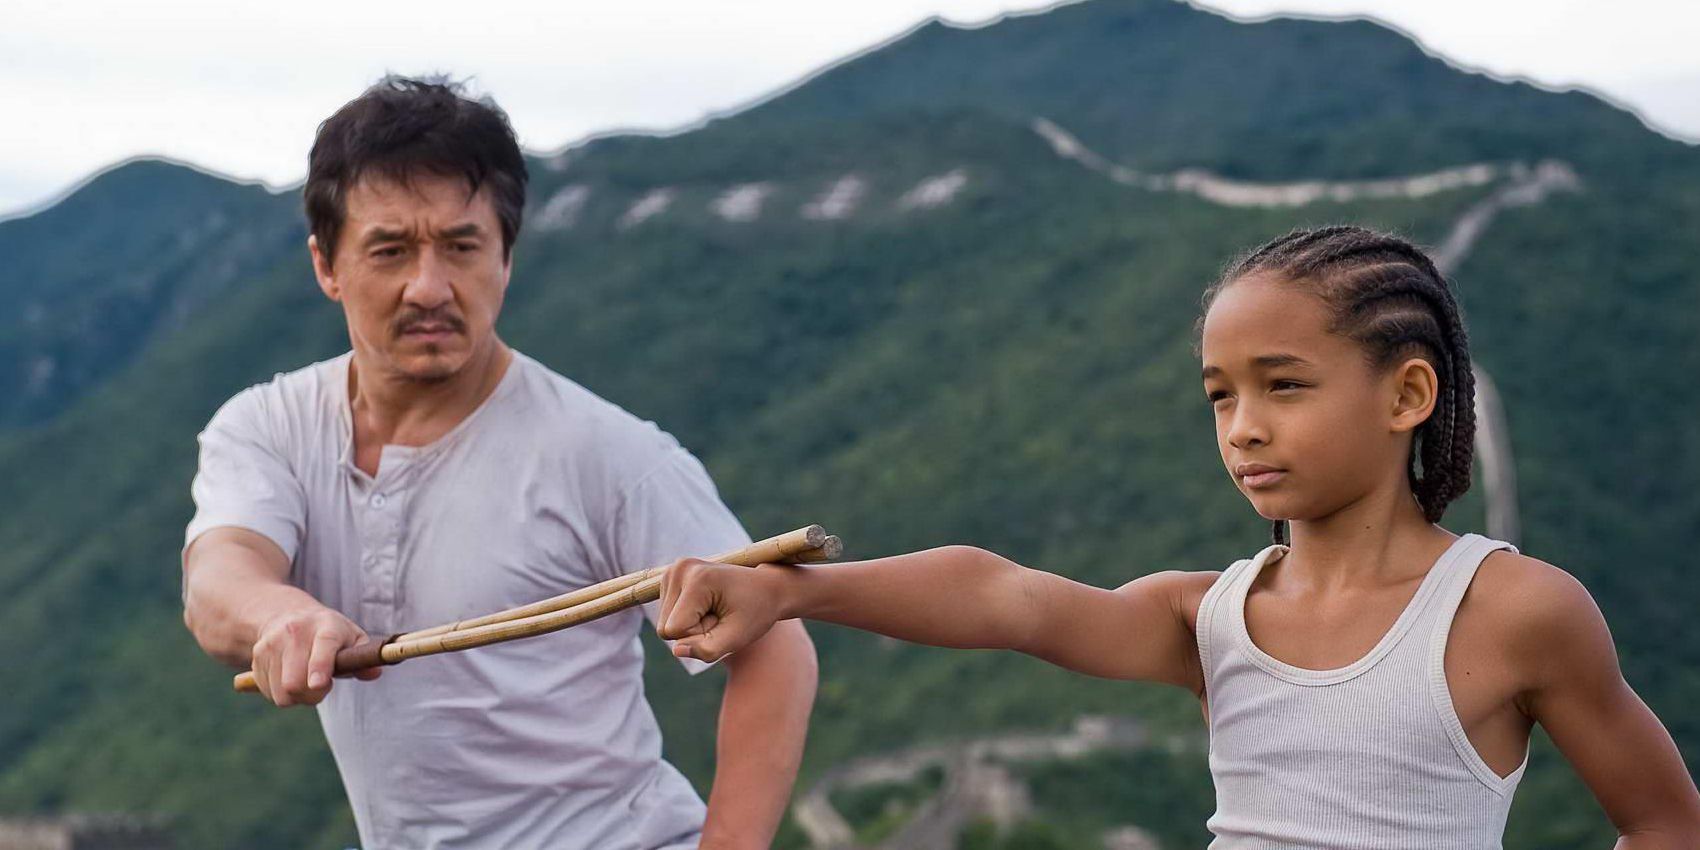 All 5 Karate Kid Movies Ranked From Worst To Best